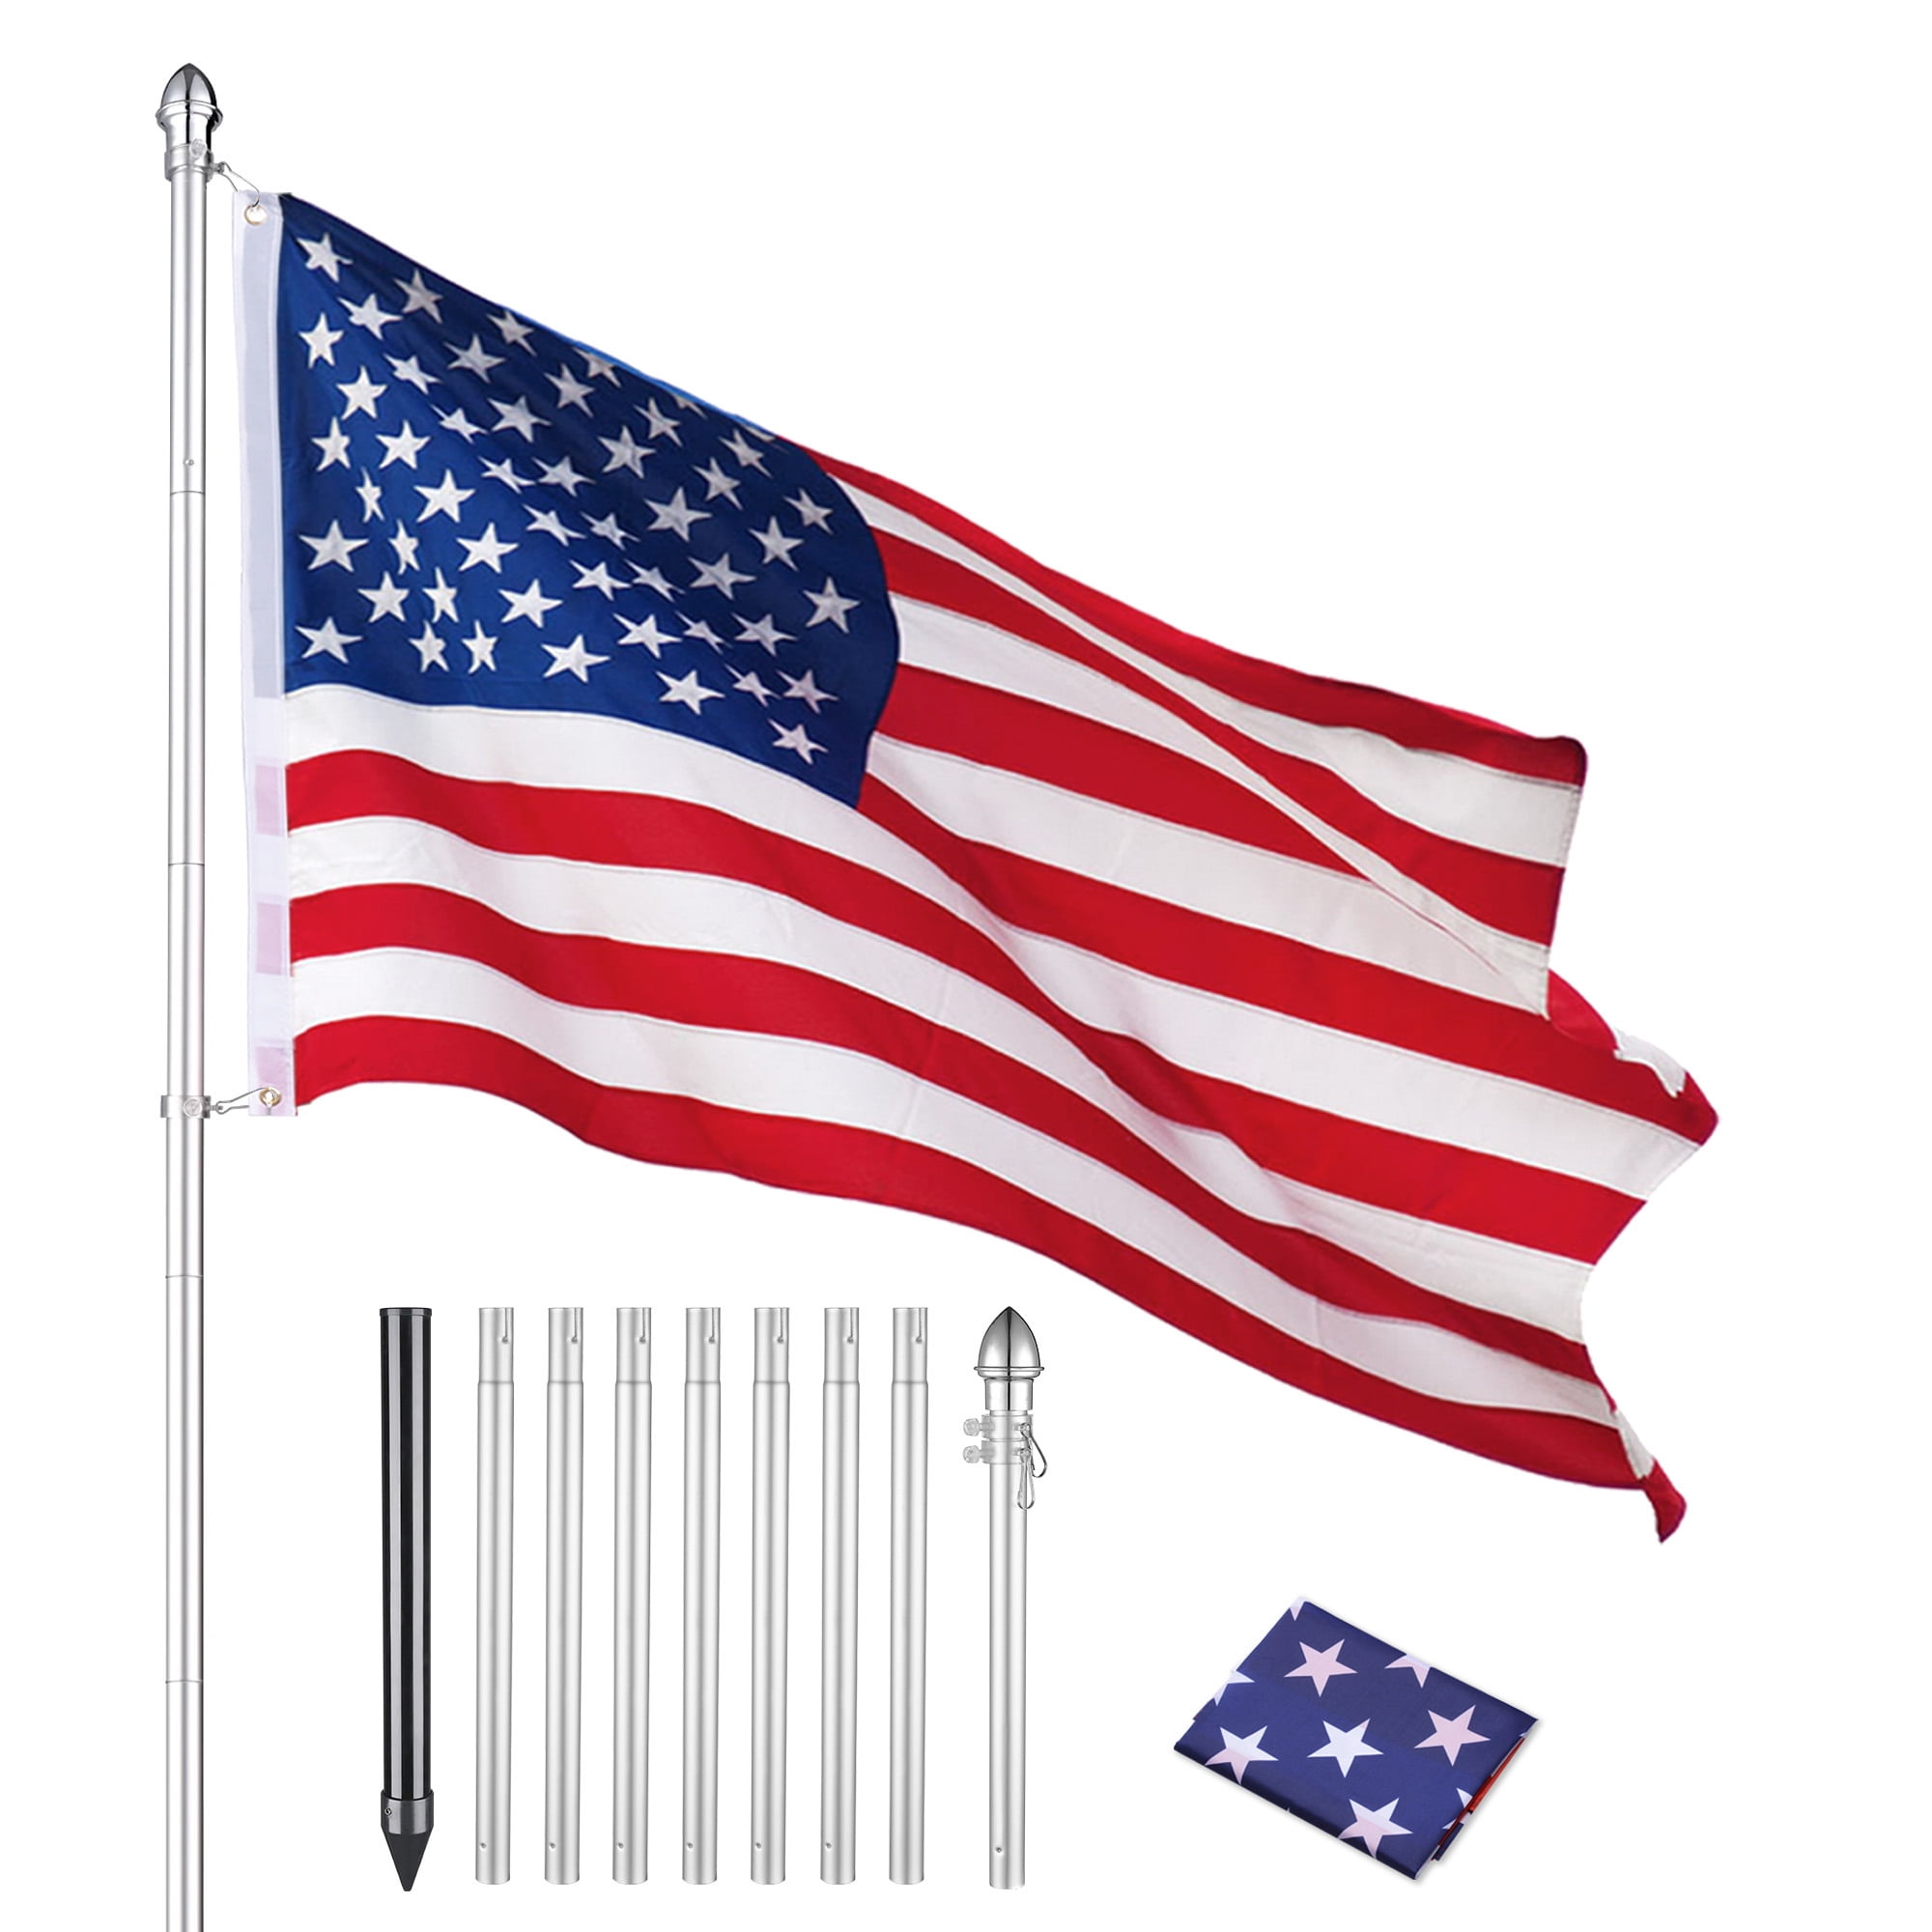 Yescom 10 Ft Aluminum Outdoor Flag Pole Kit in Ground American